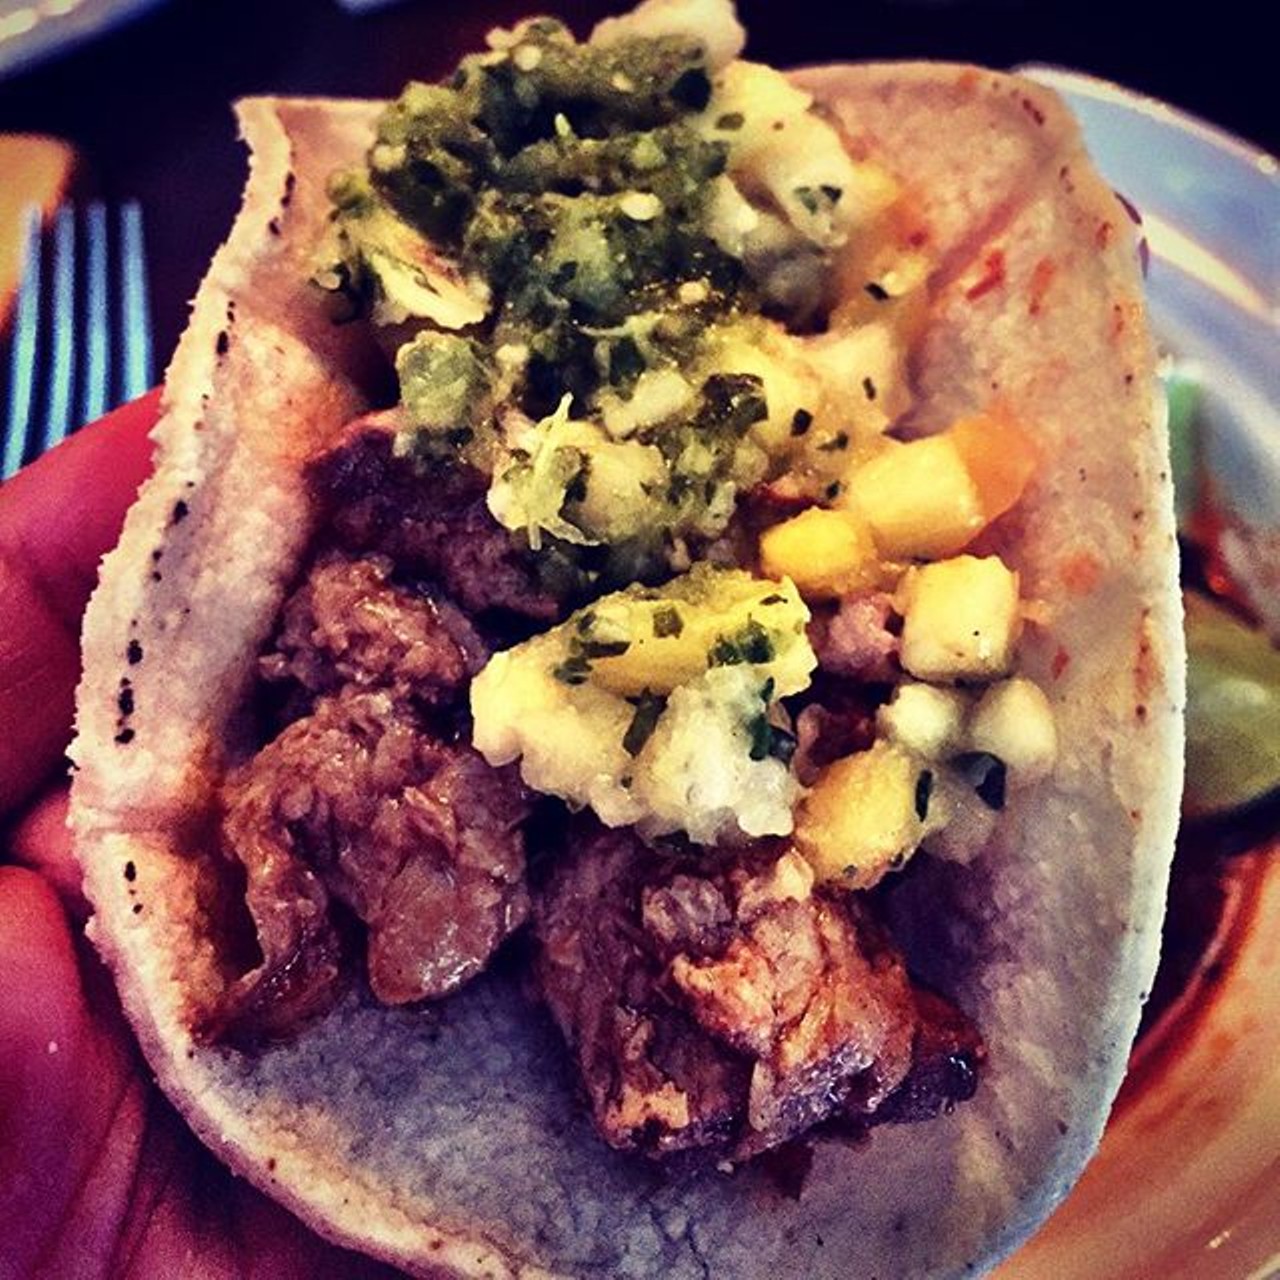 Momocho
Another classy take on tacos, Momocho offers taquitos and modern Mexican plates. Munch on tortillas stuffed with things like korean style grilled beef sirloin or braised wild boar, and enjoy the hip decor of  wrestling memorabilia. 
(Photo via ForensicsGirl, Instagram)